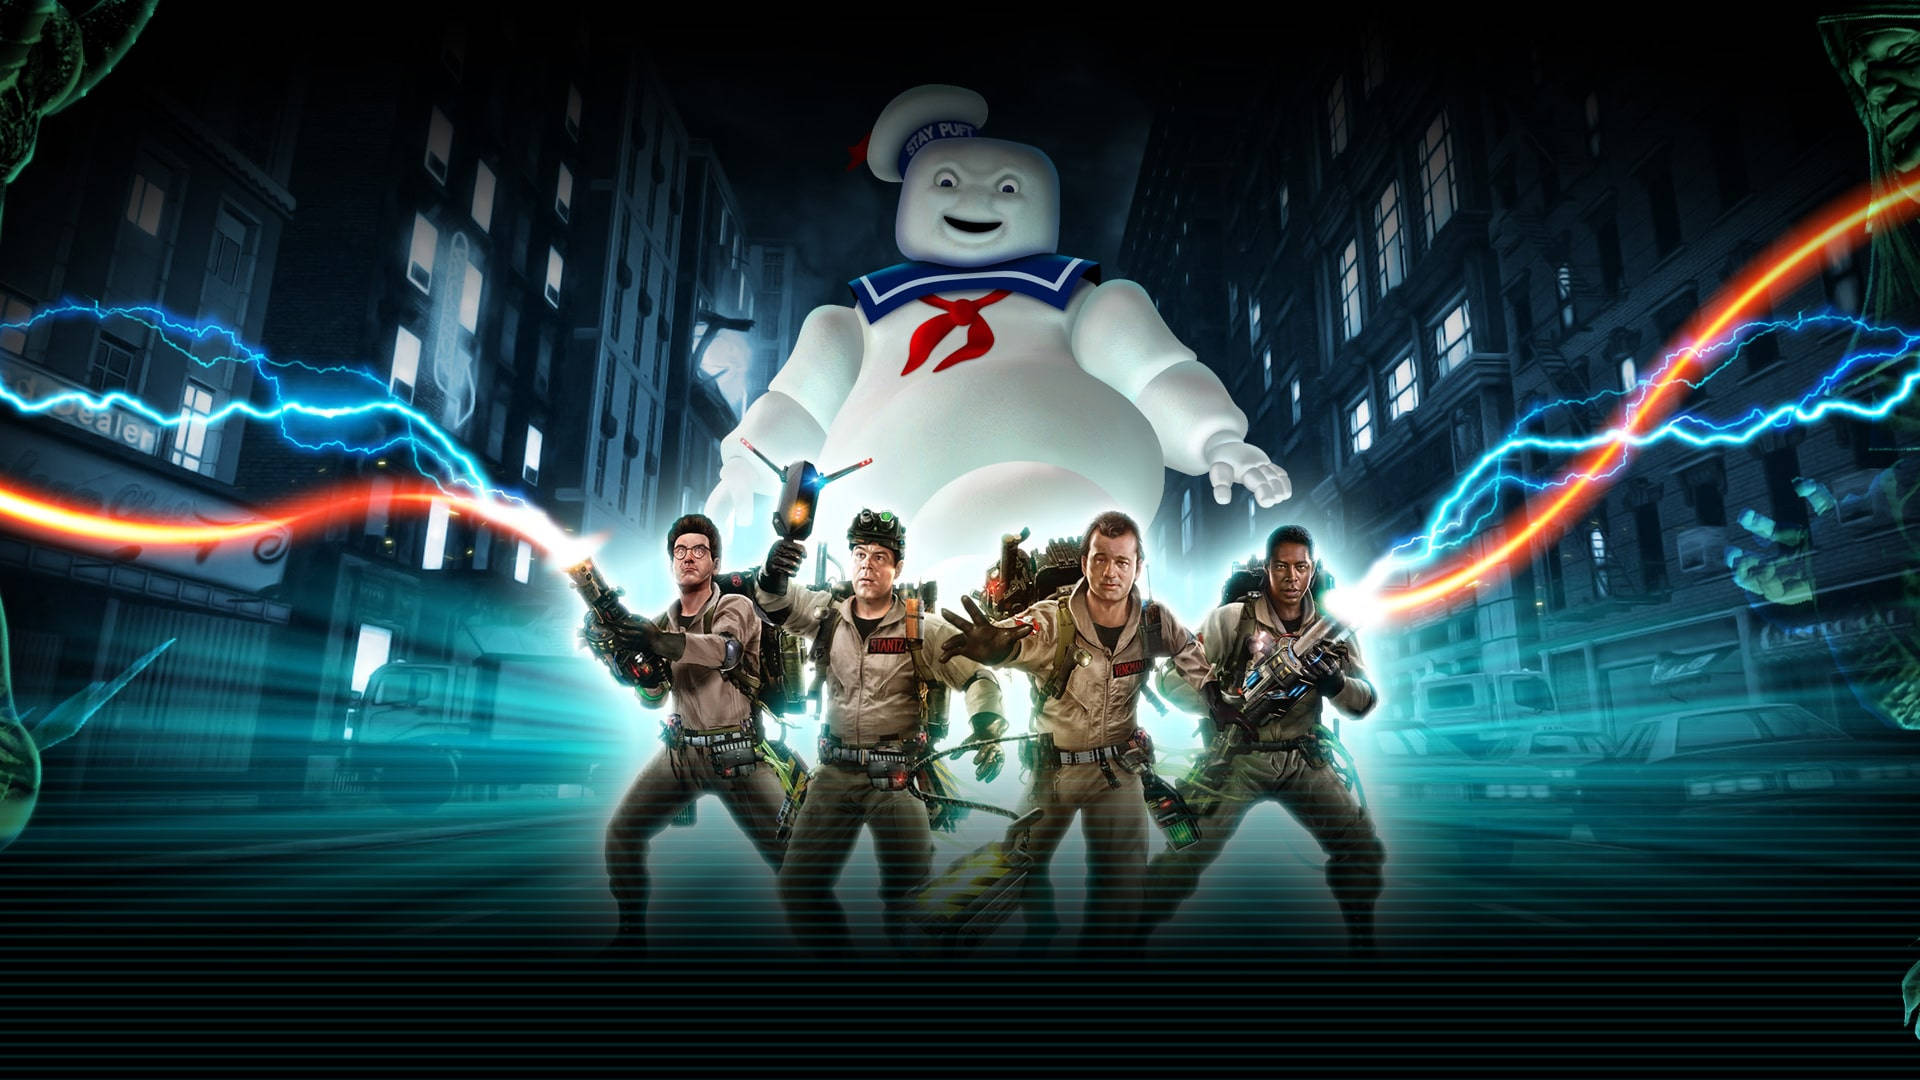 Ghostbusters Mega Stay Puft